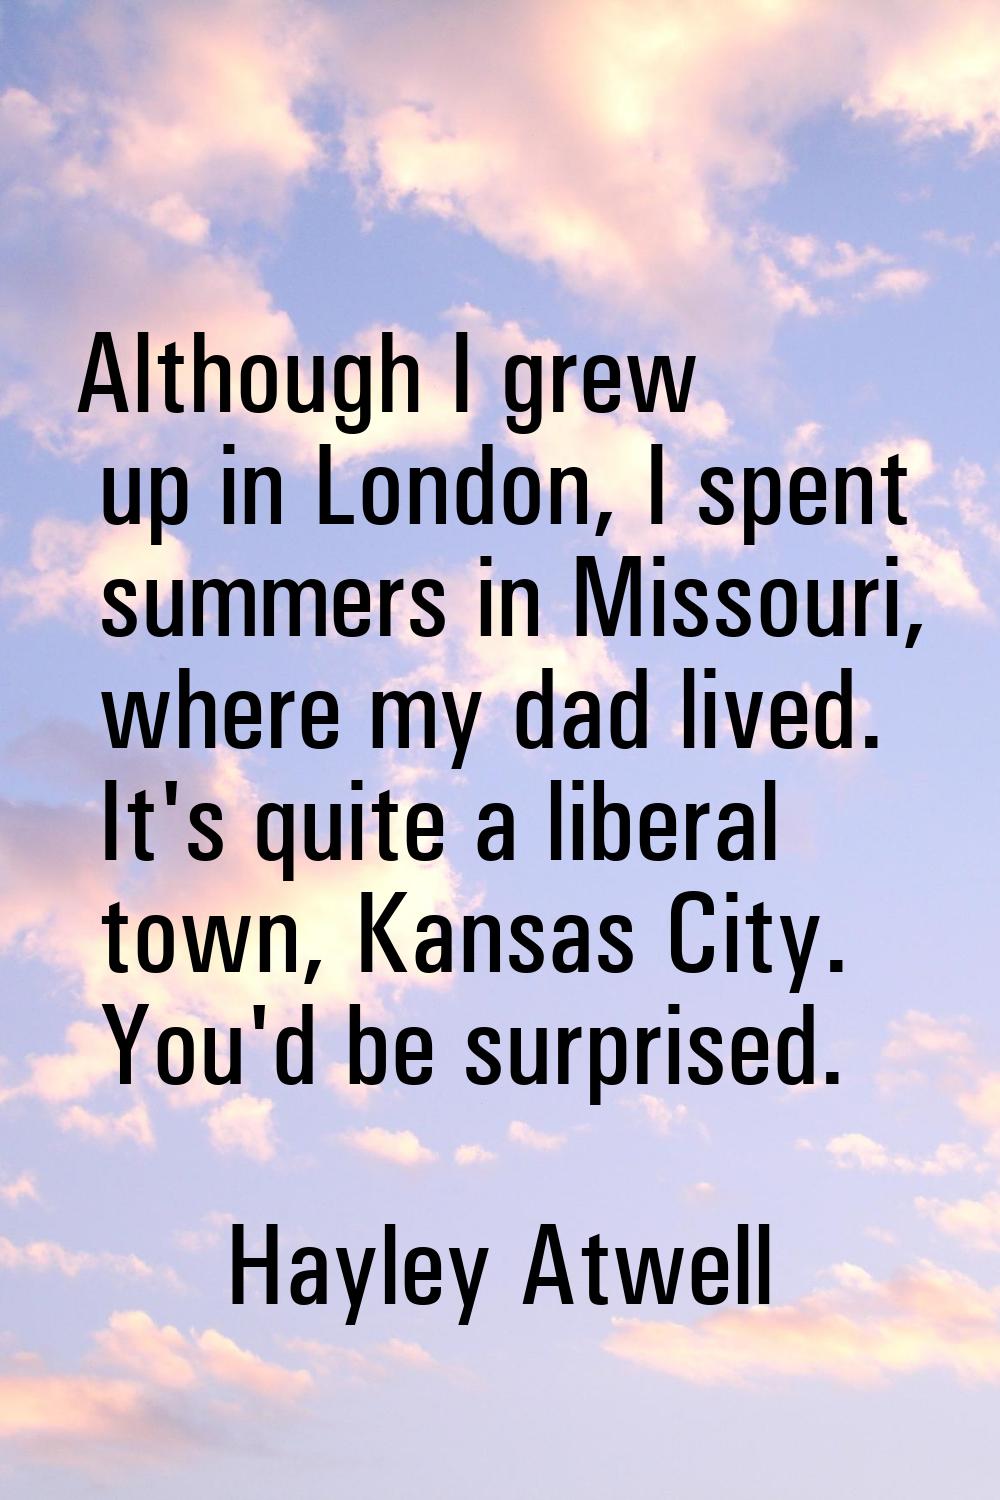 Although I grew up in London, I spent summers in Missouri, where my dad lived. It's quite a liberal